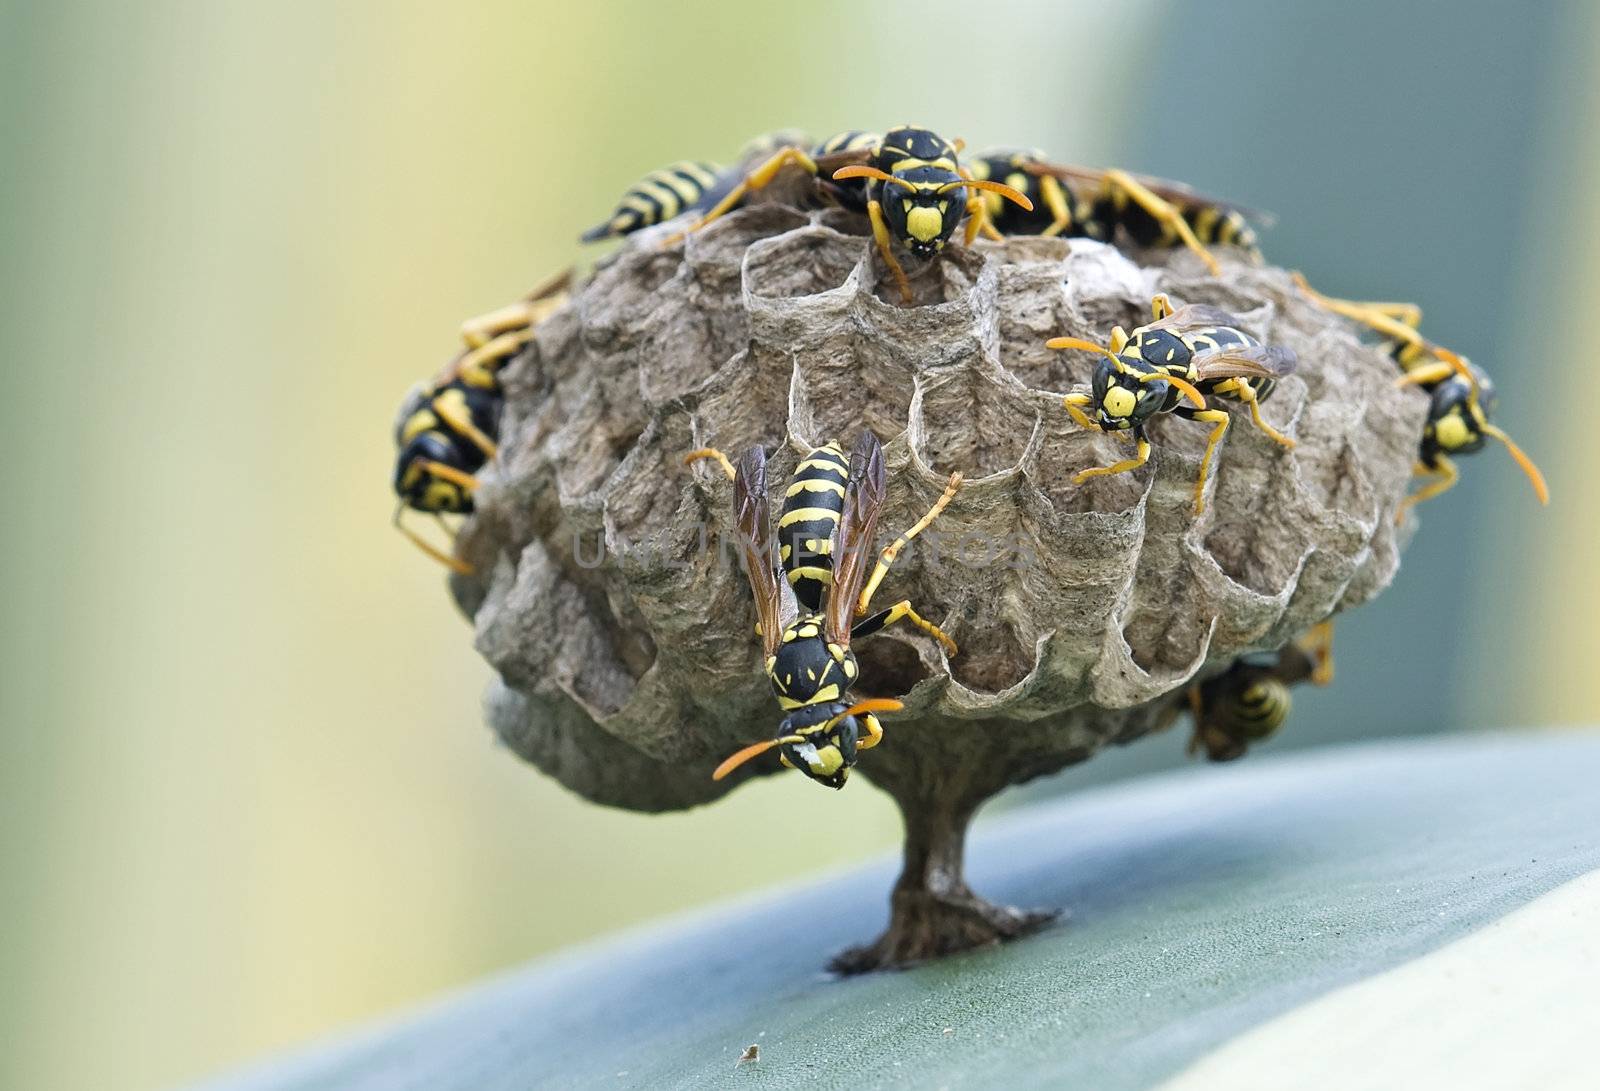 A nest of european wasps (Polystes) by AlessandroZocc